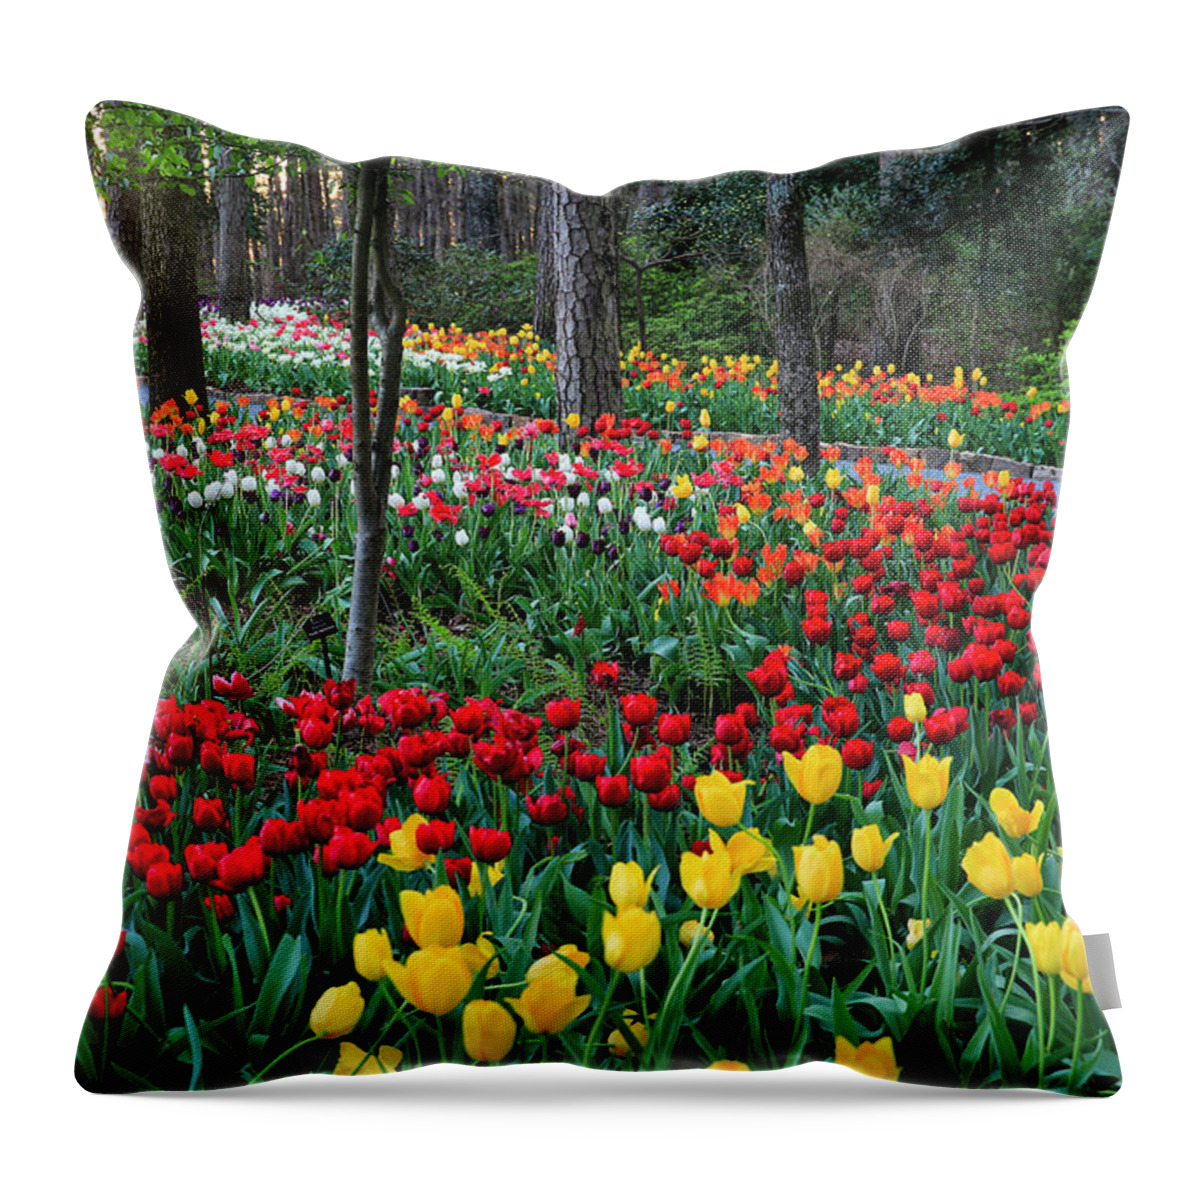 Flowers Throw Pillow featuring the photograph Color Explosion by William Rainey